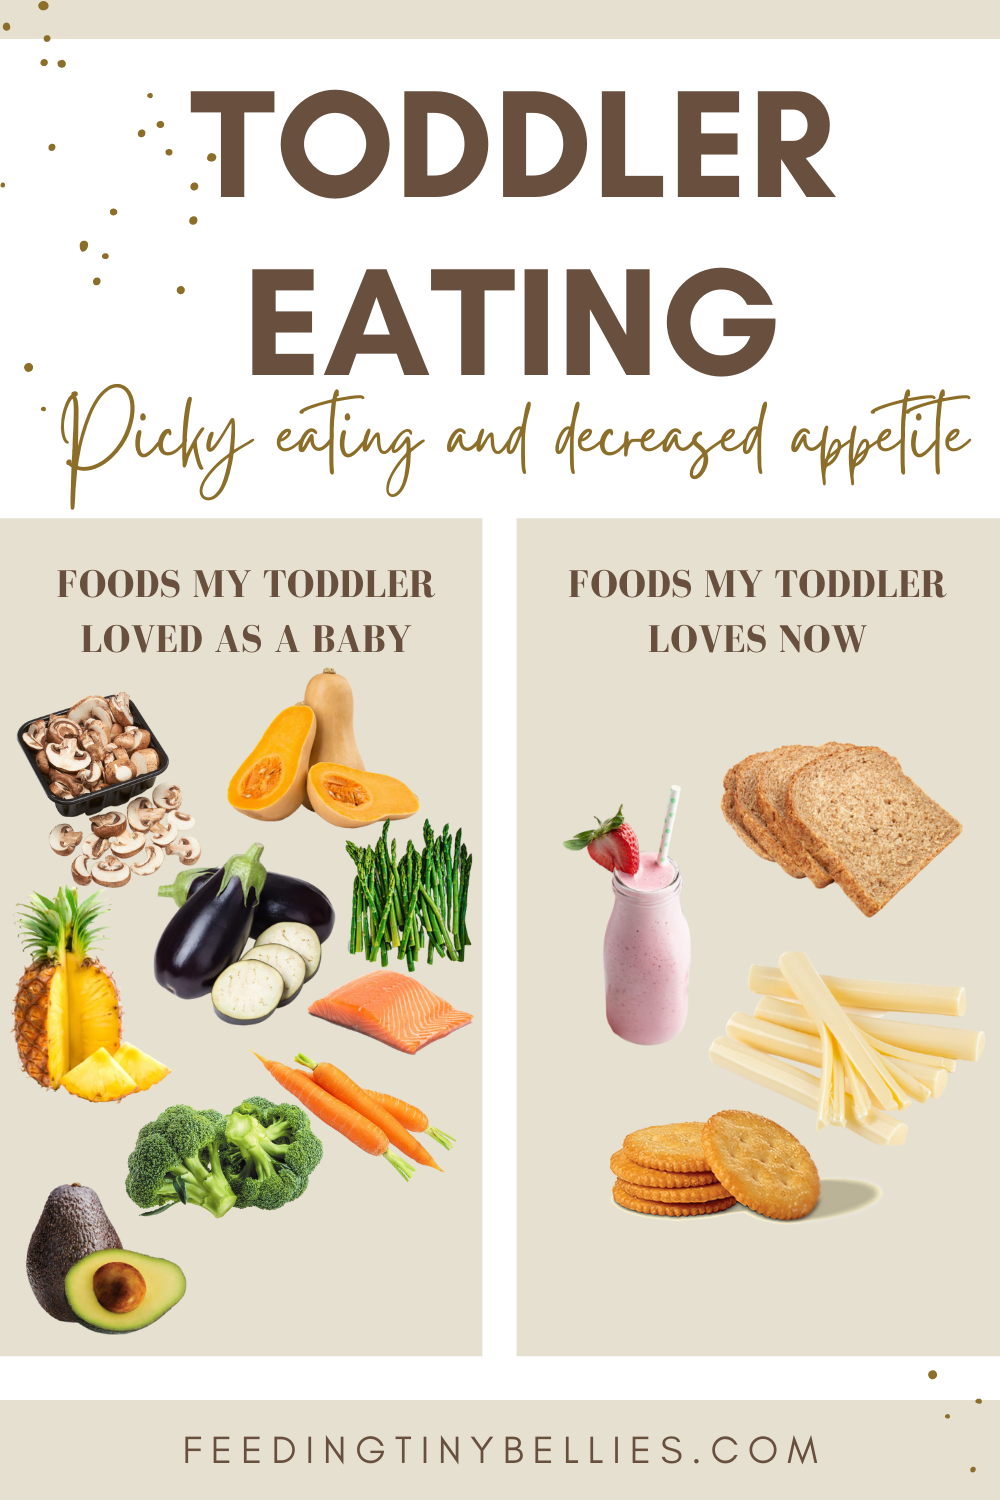 Toddler eating - Picky eating and decreased appetite